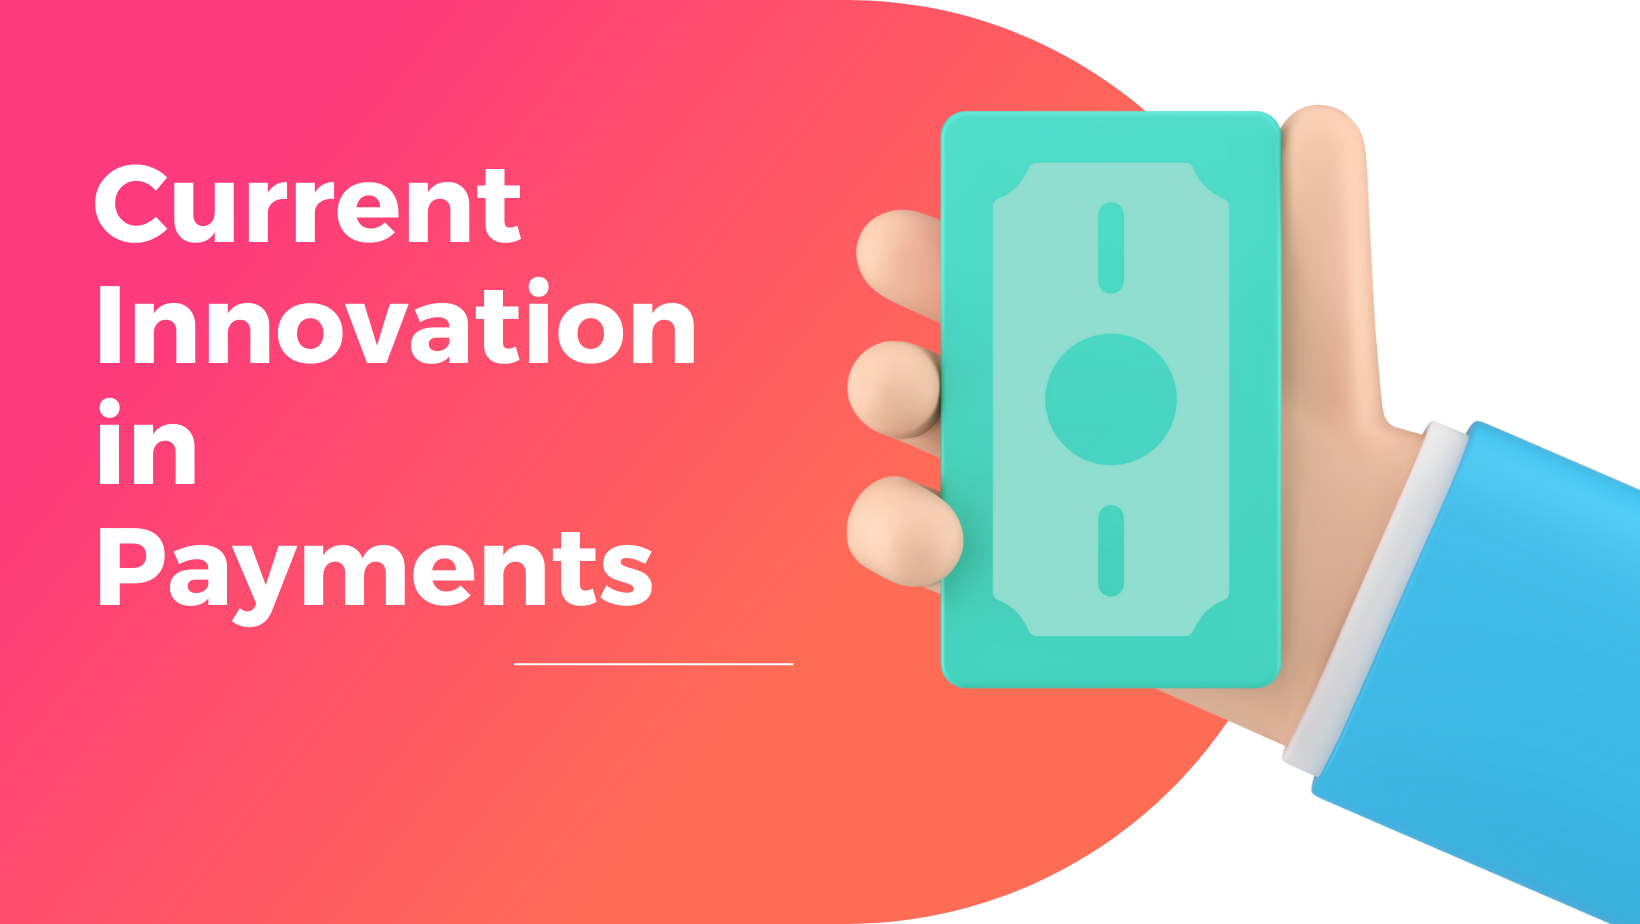 Current Innovation in Payments	